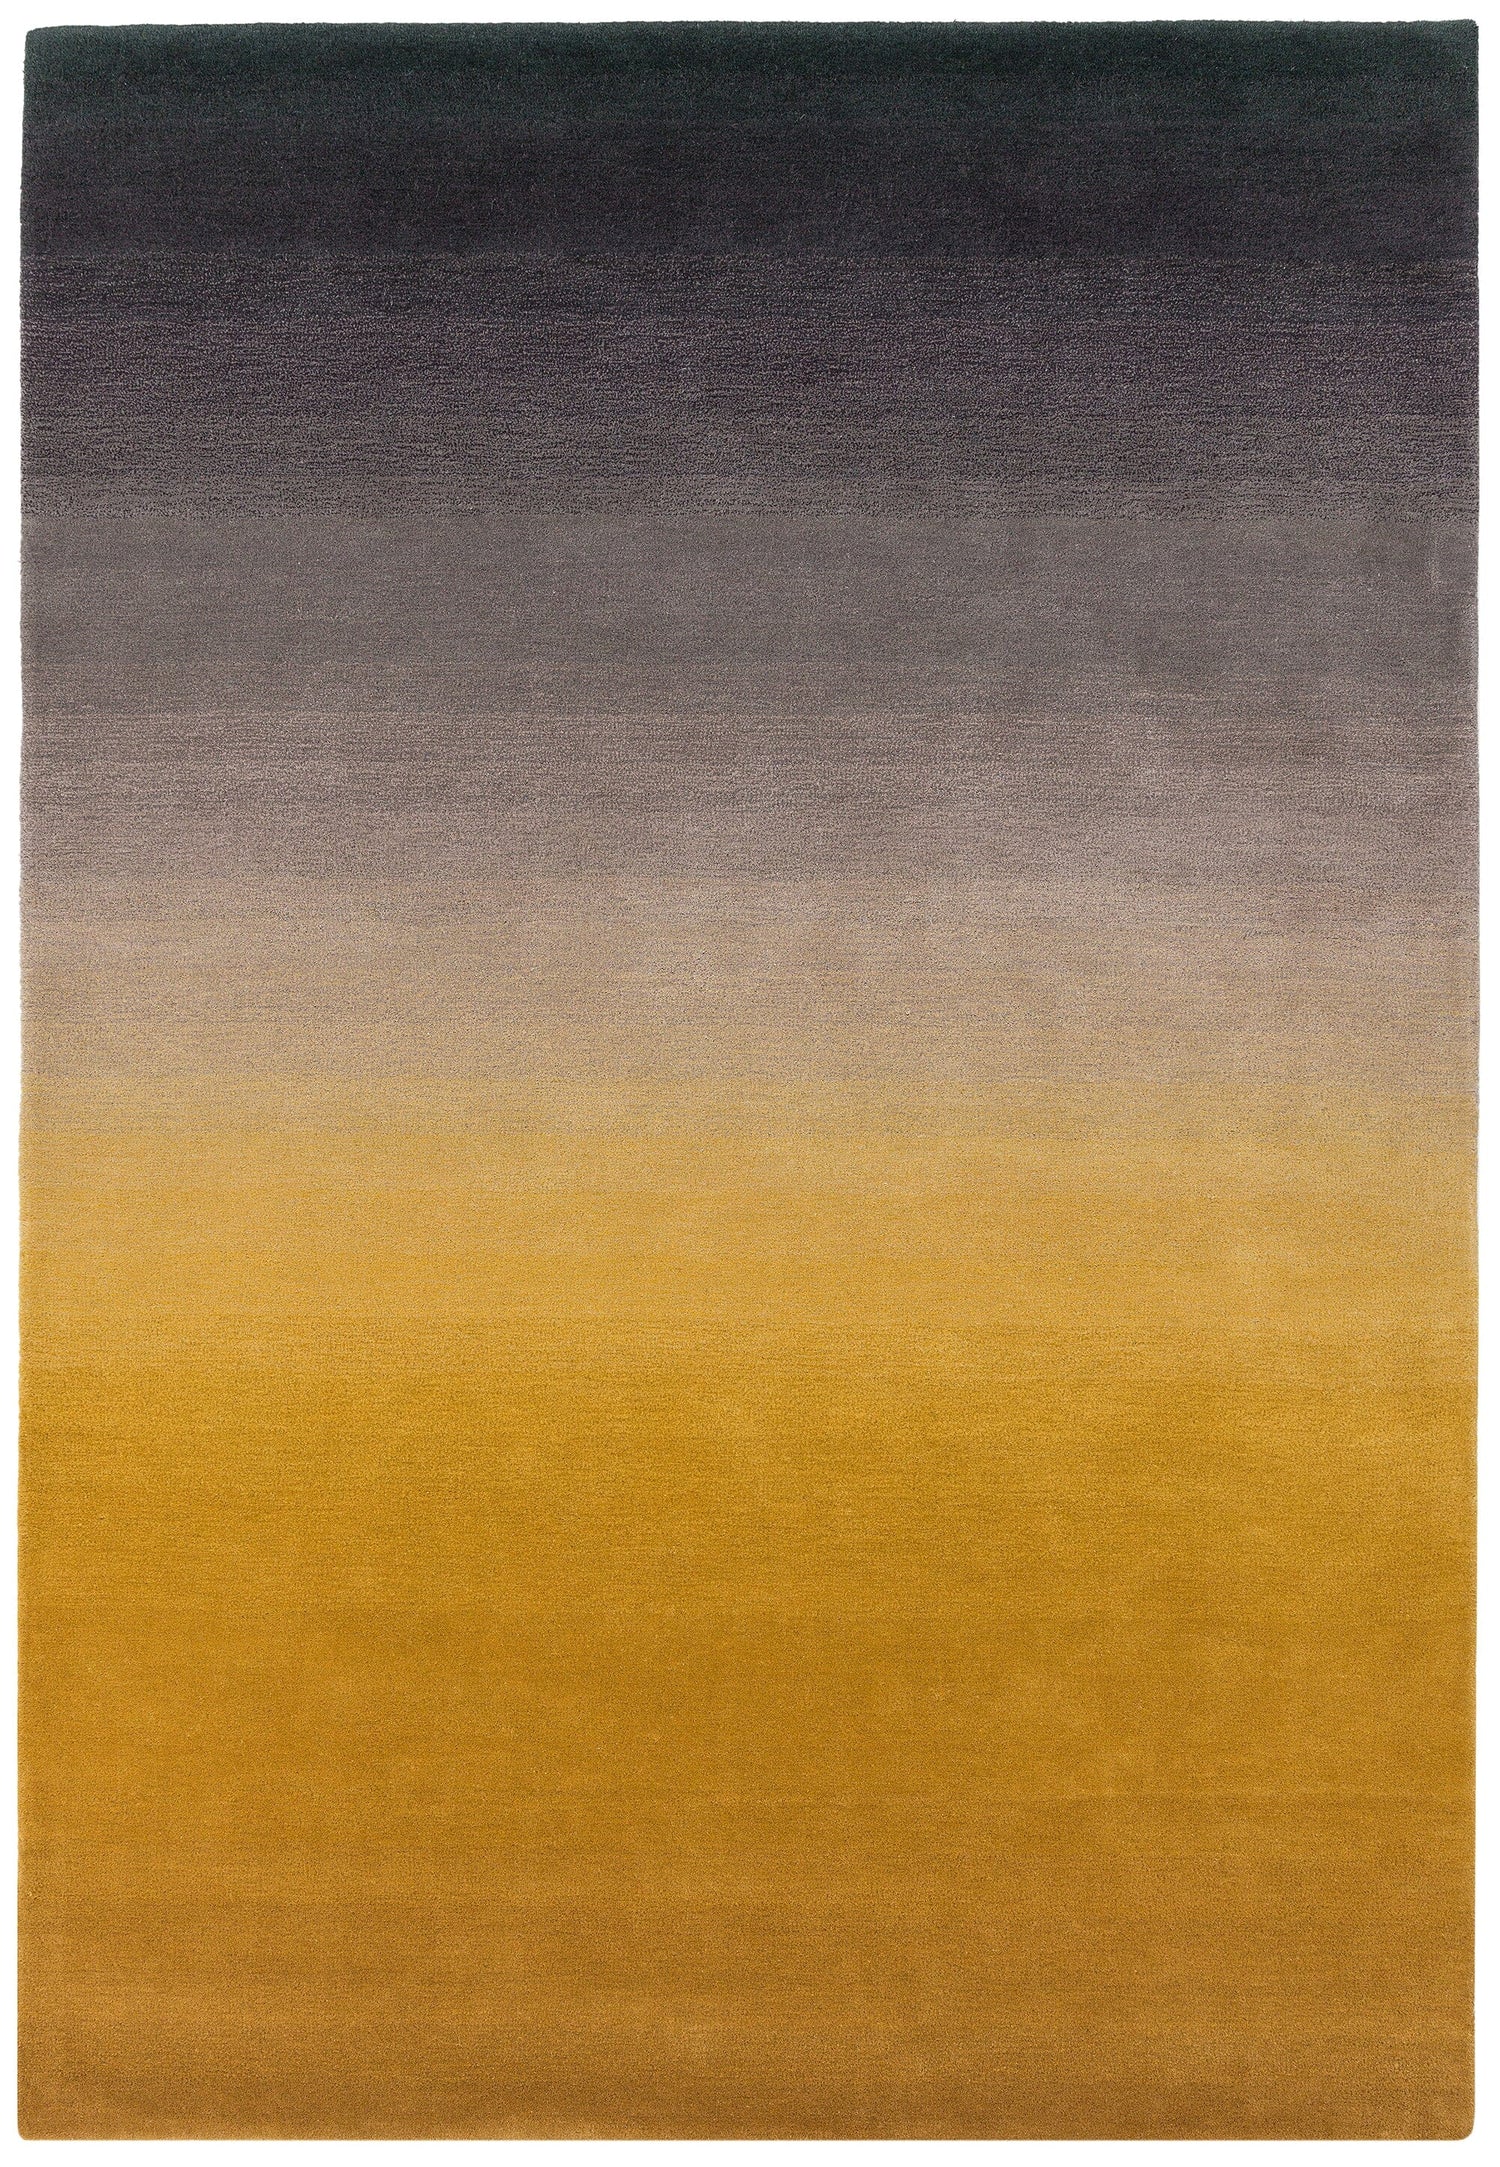  Asiatic Carpets-Asiatic Carpets Ombre Hand Tufted Rug Mustard - 120 x 170cm-Yellow, Gold 741 